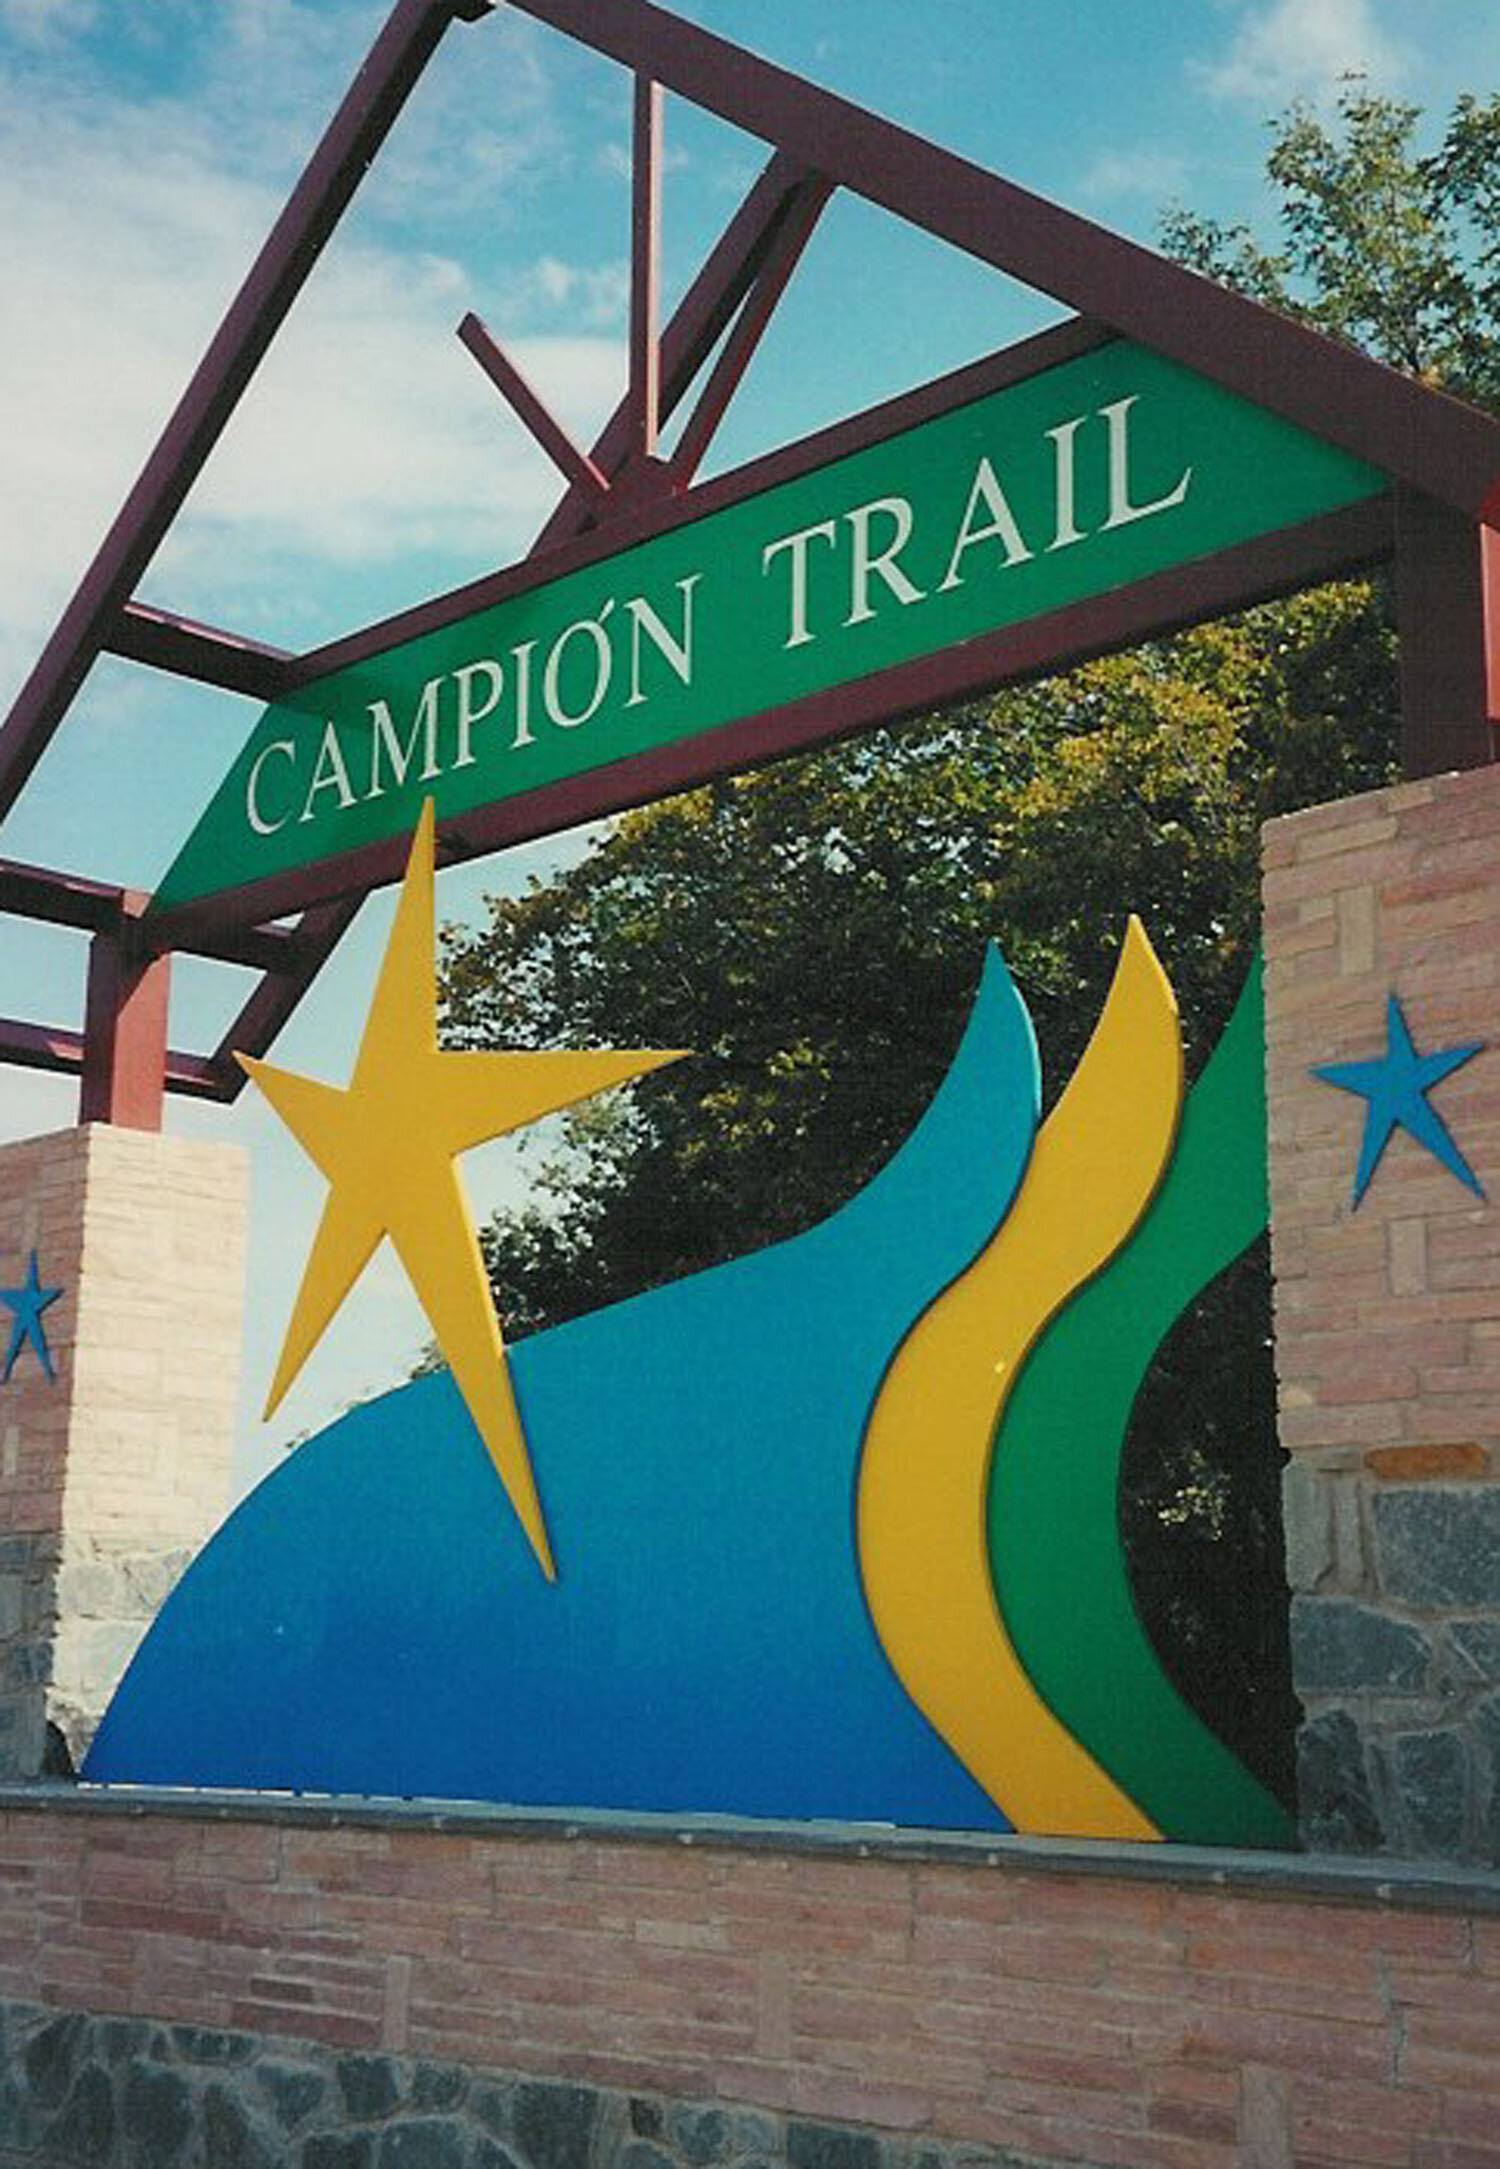 Campion Trail Monument - Irving, TX